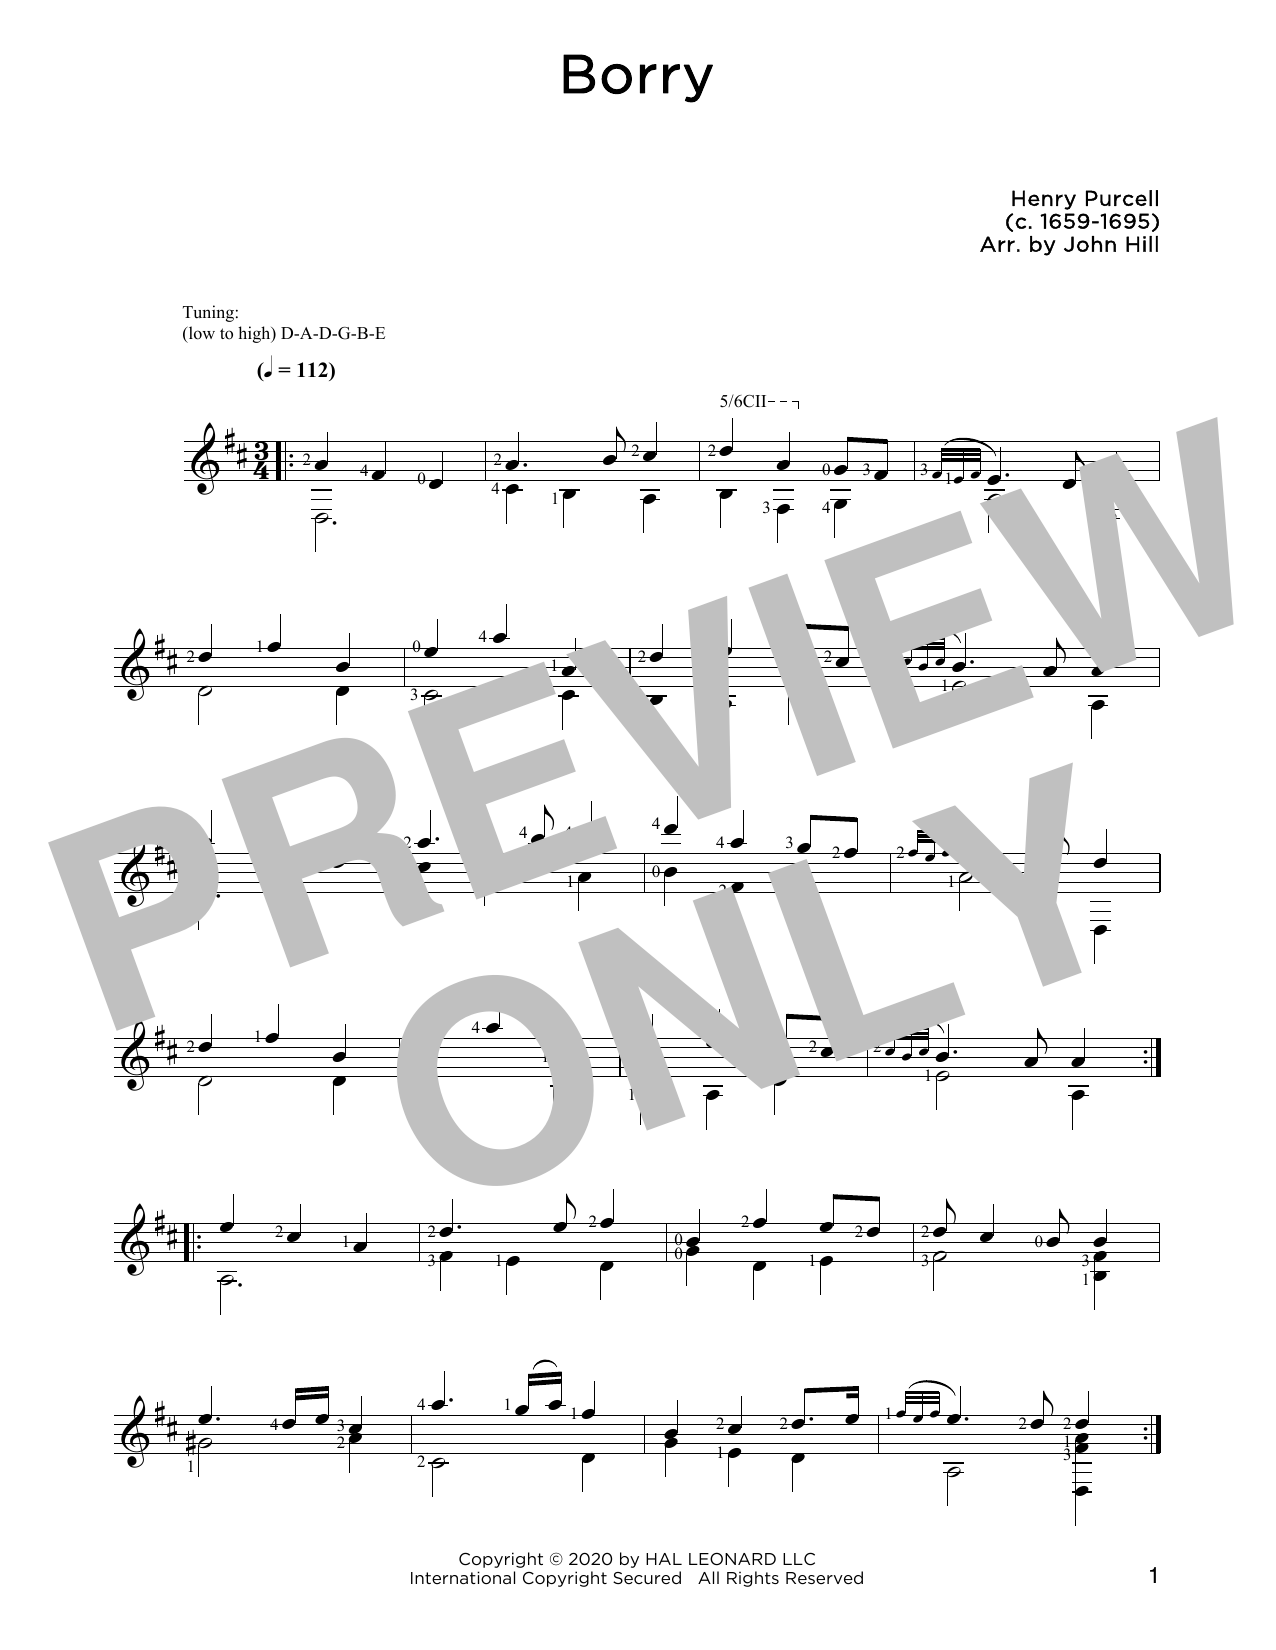 Download Henry Purcell Borry Sheet Music